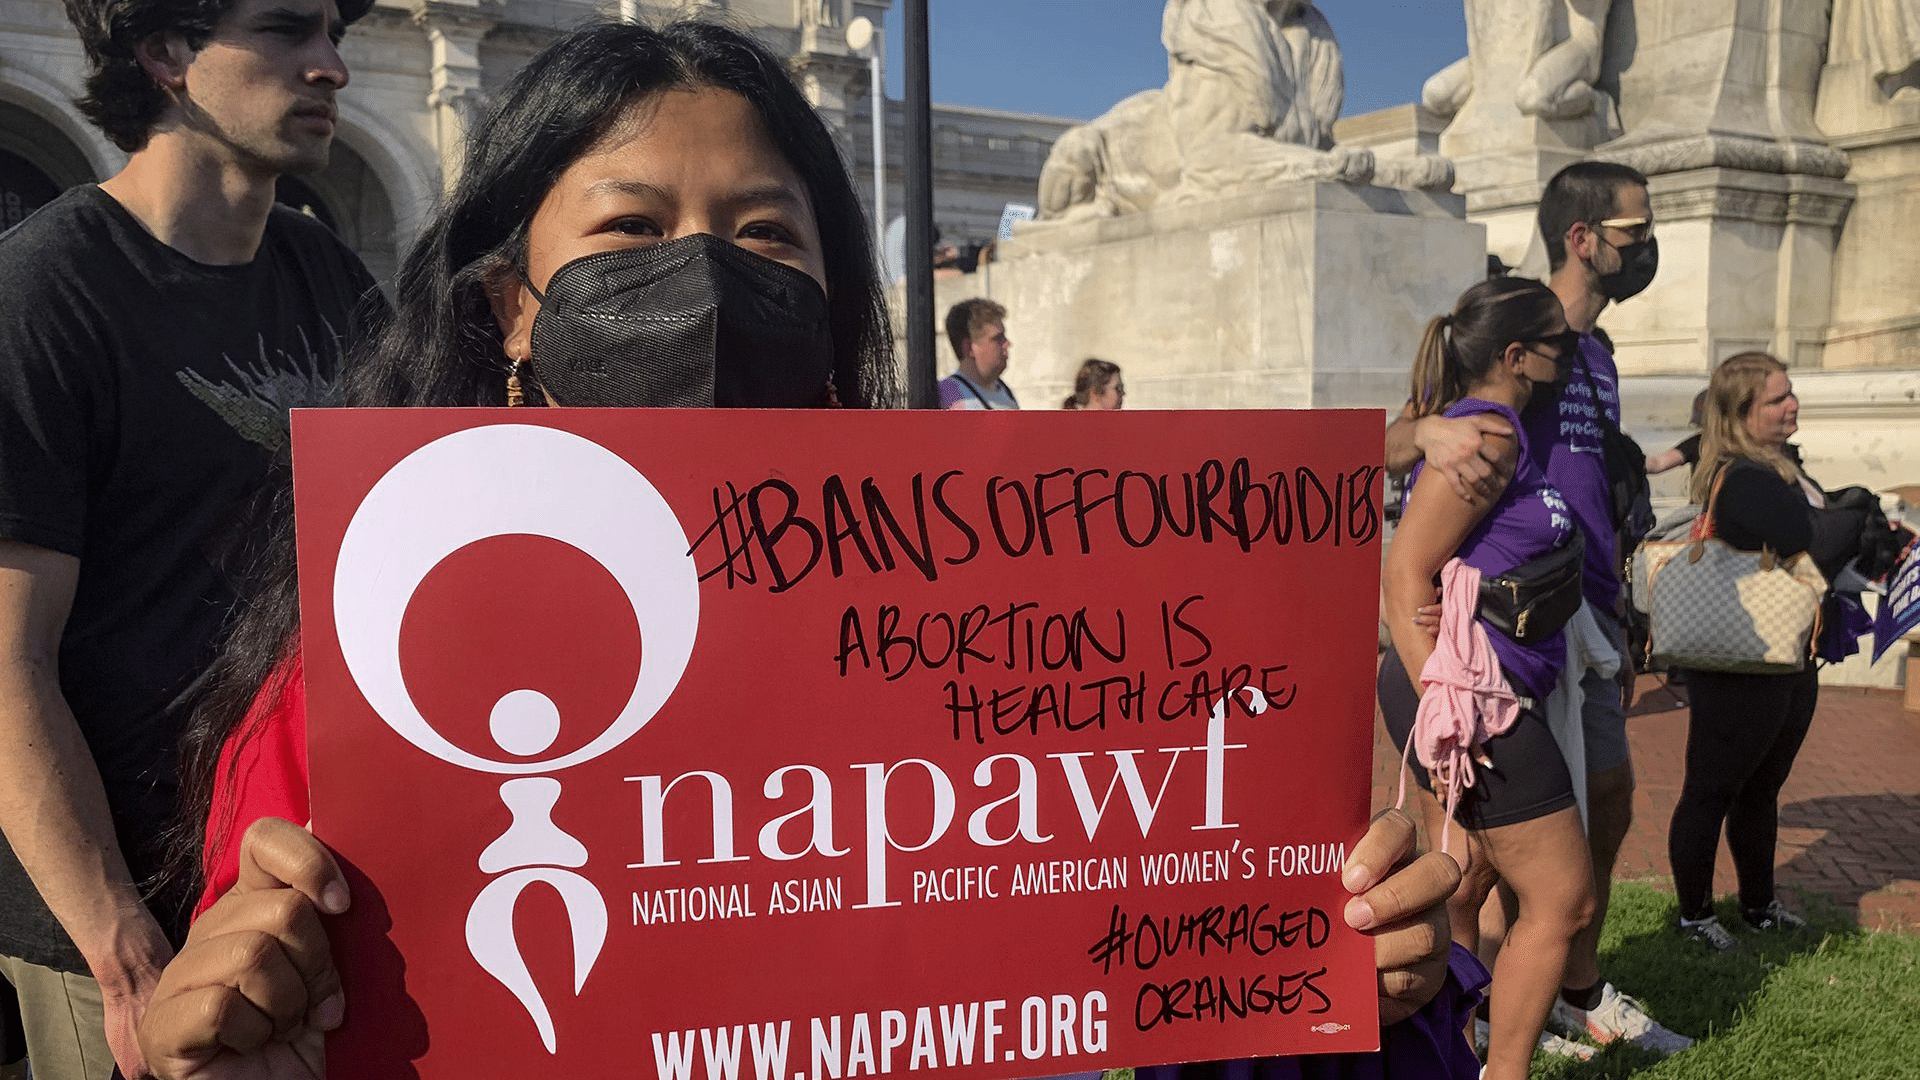 Person holding up NAPAWF sign with text reading "abortion is health care"